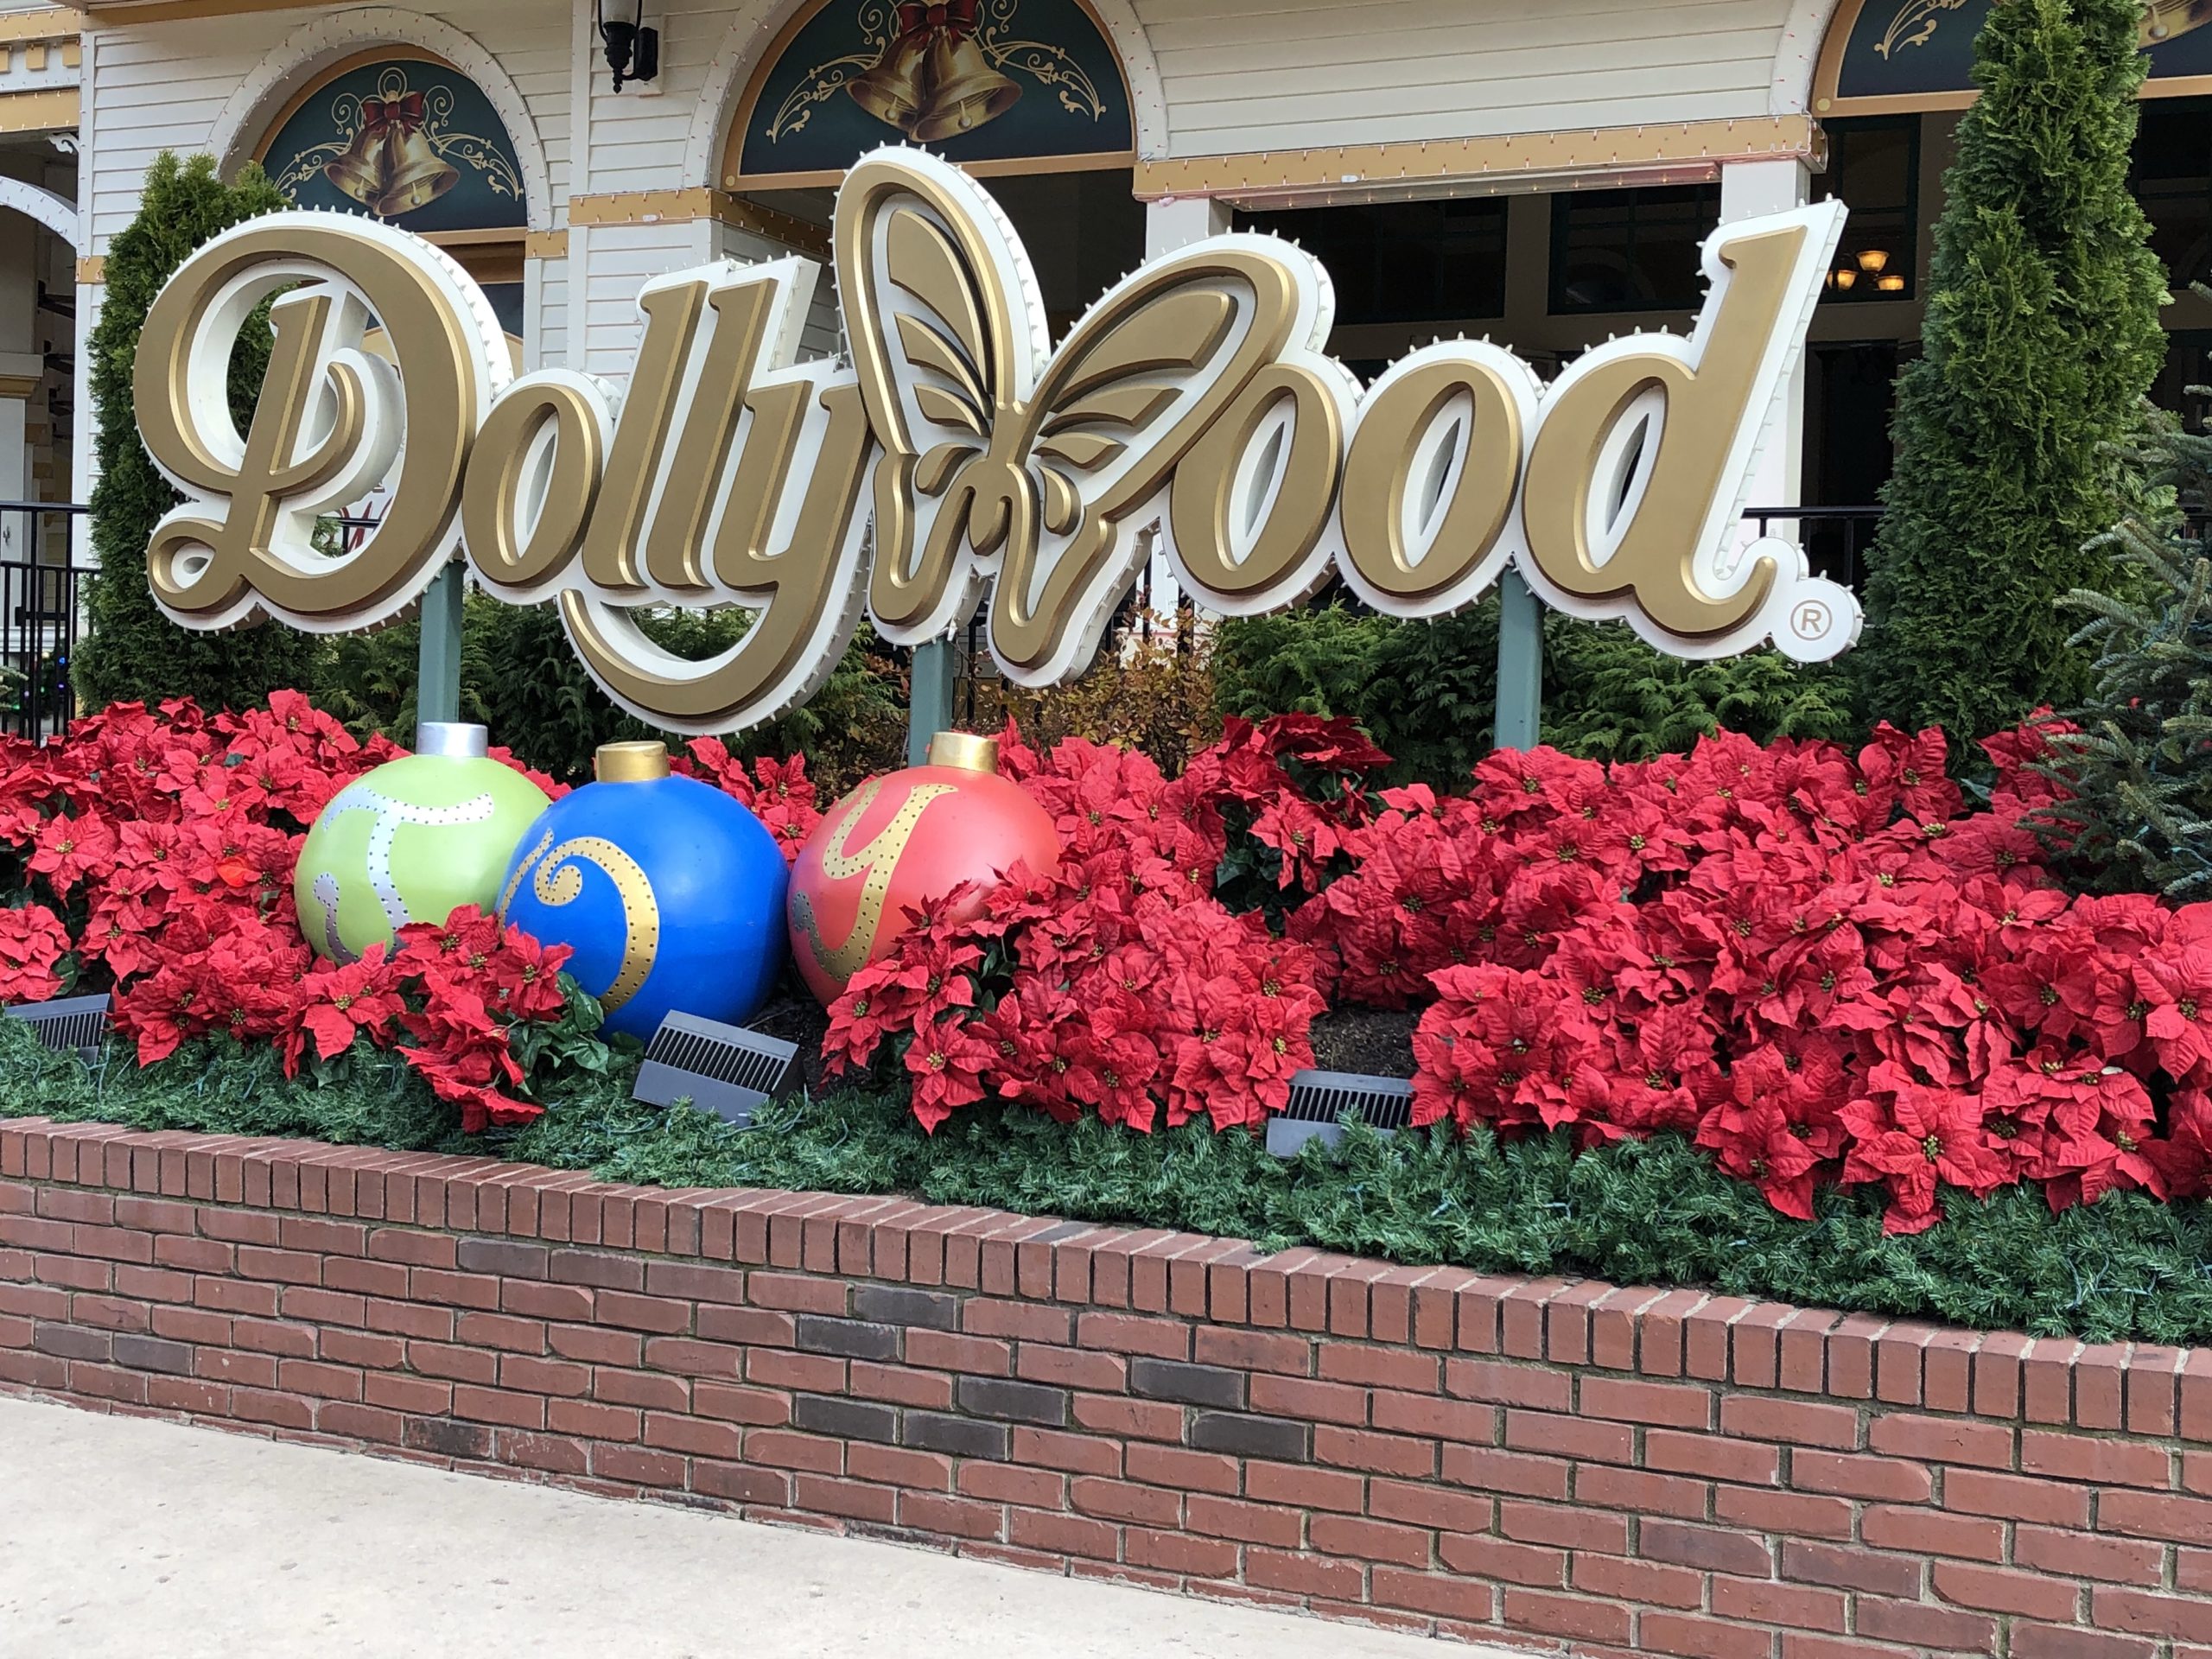 Is Dollywood Open During The Month Of February - Dollywood